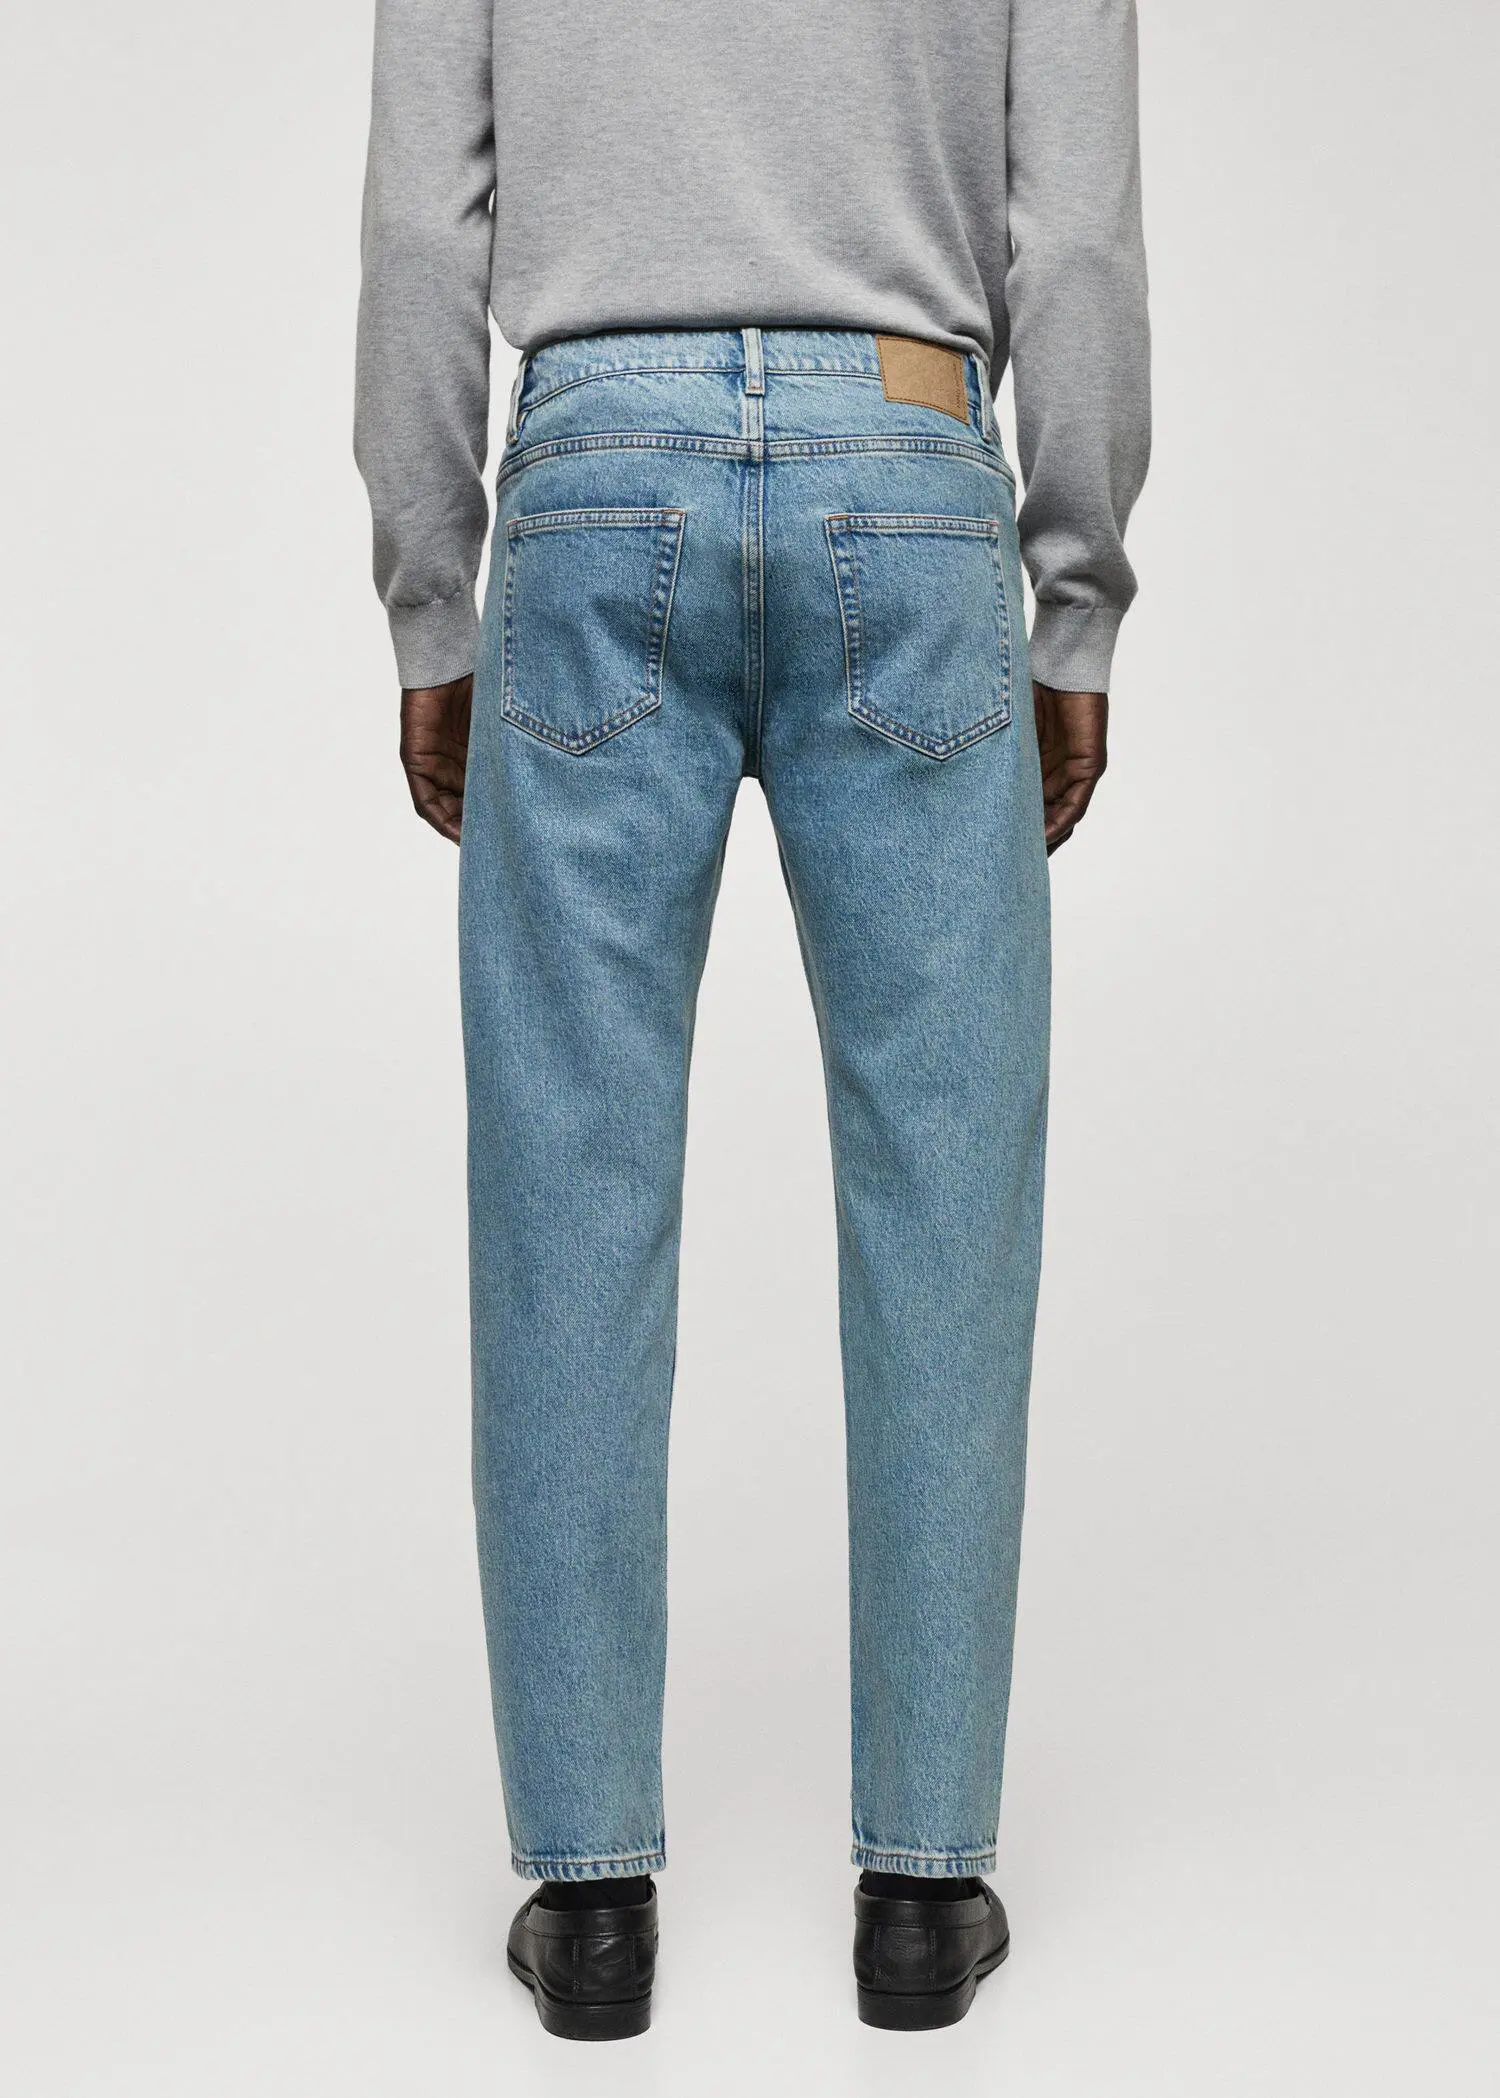 Mango Ben tapered cropped jeans. 3